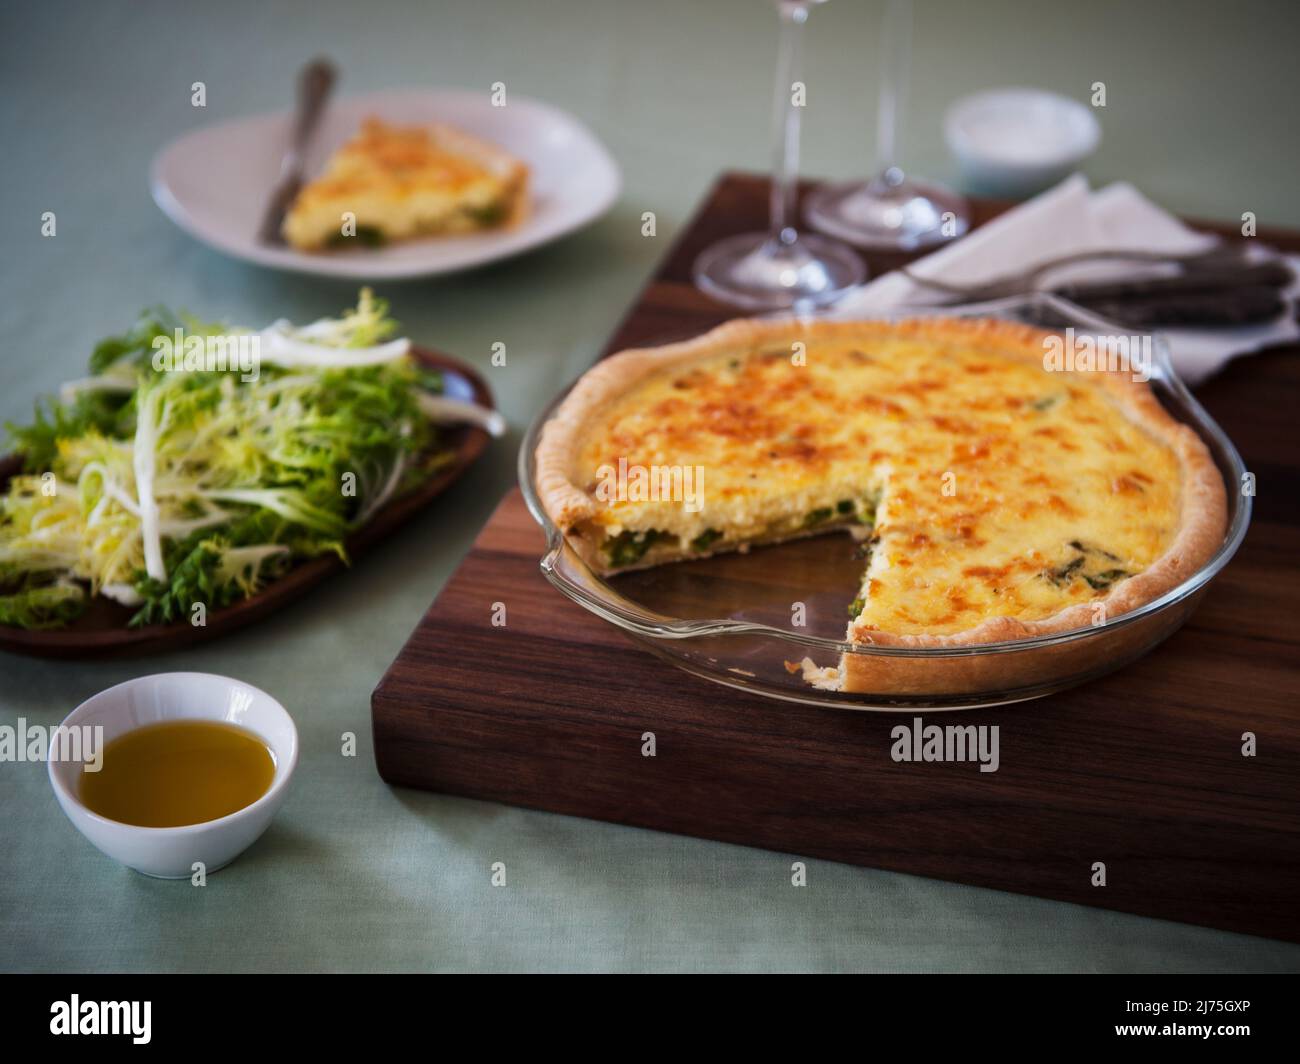 Asparagus Quiche in a Baking Dish; Side Salad Stock Photo